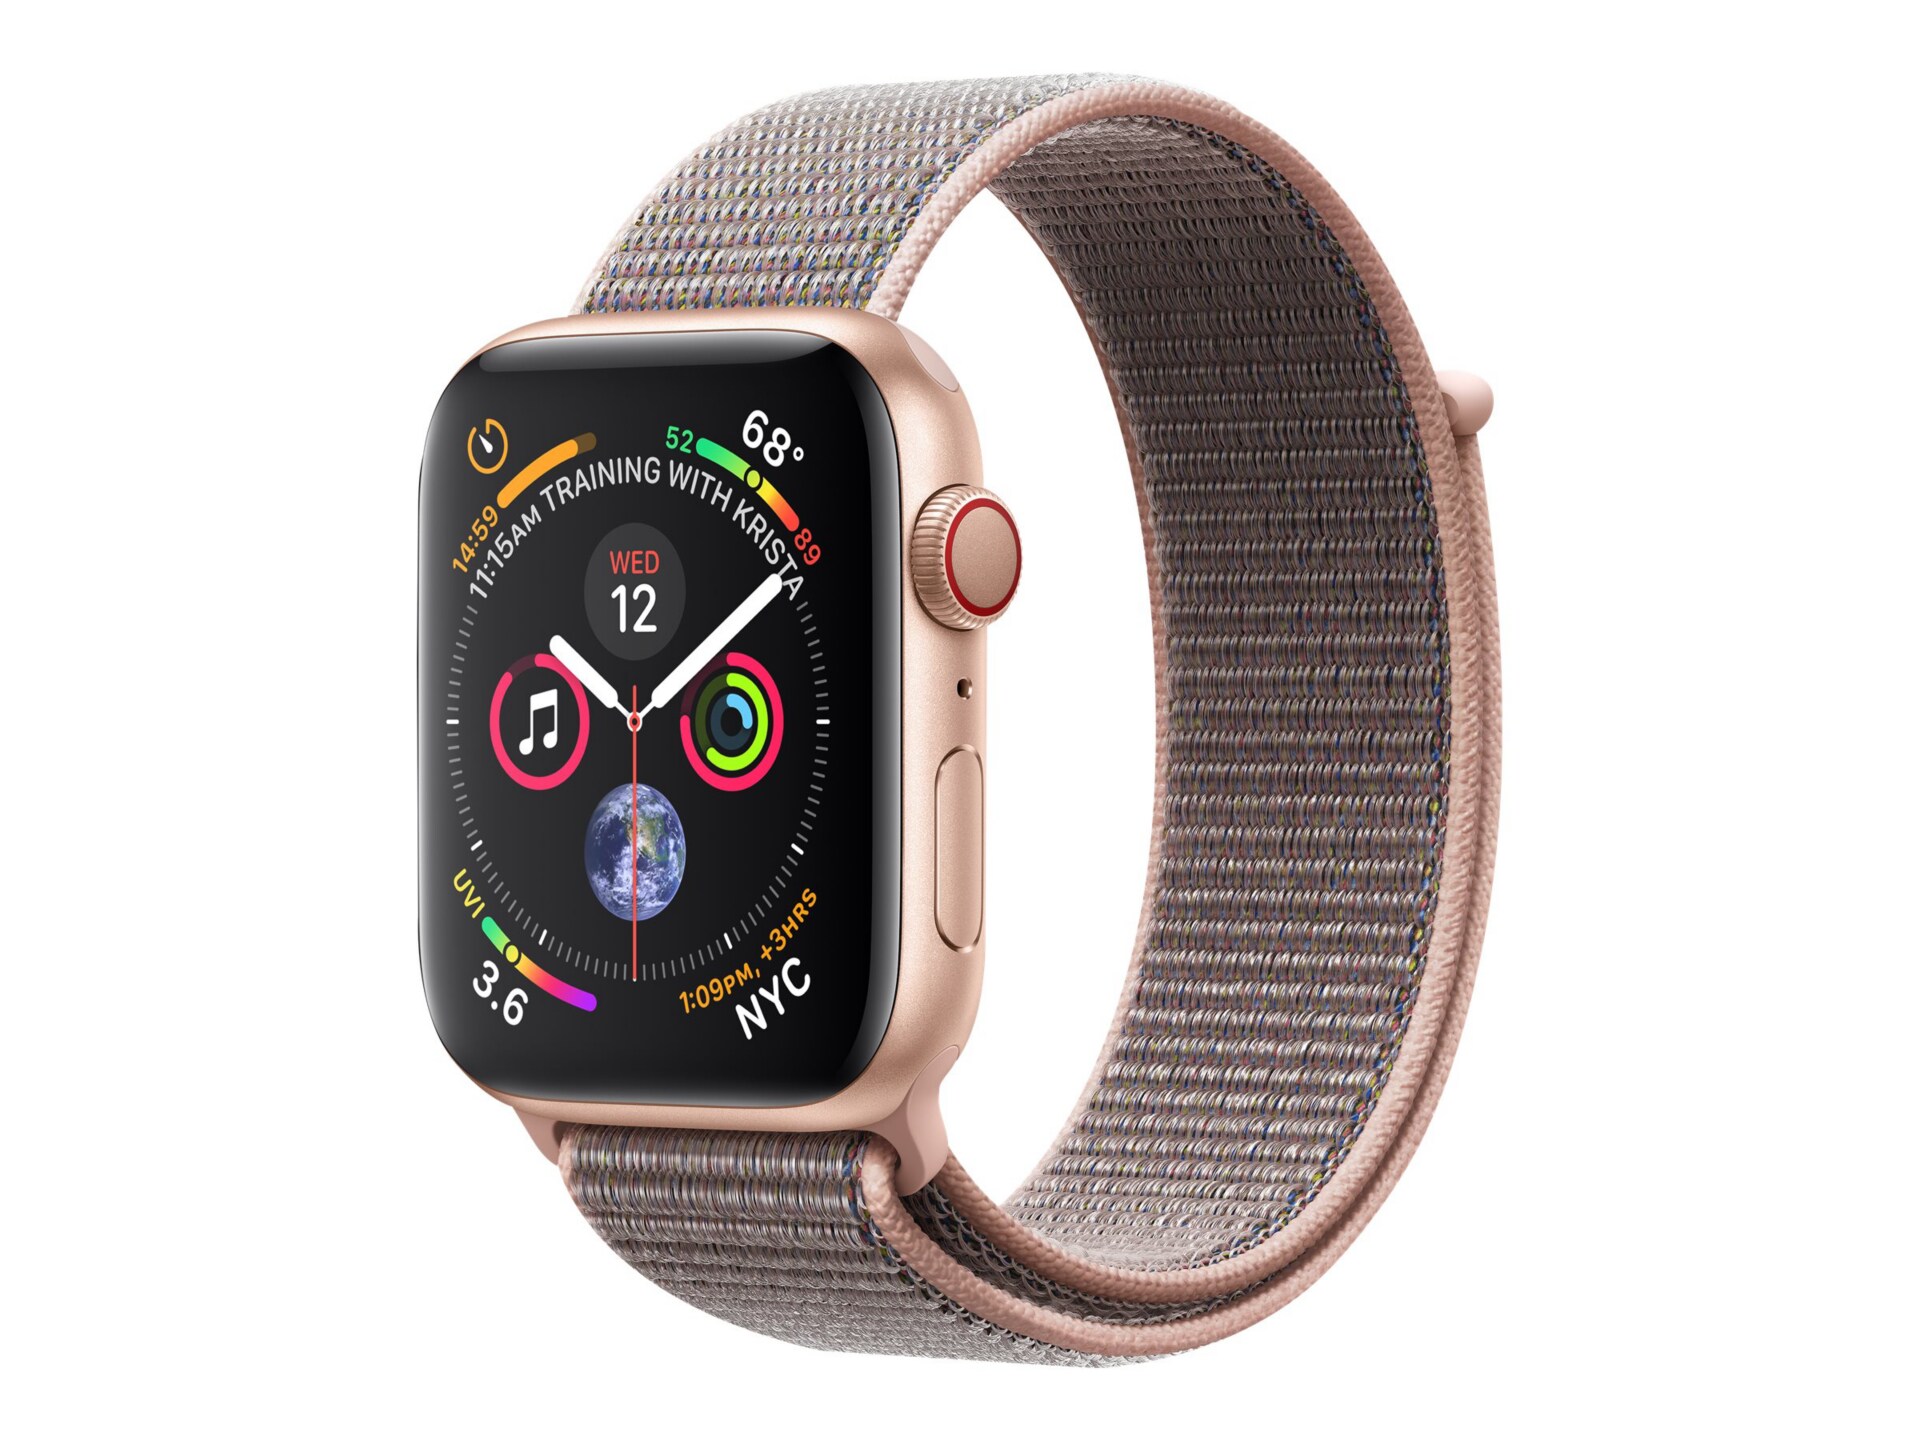 Apple Watch Series 4 (GPS + Cellular) - gold aluminum - smart watch with sp